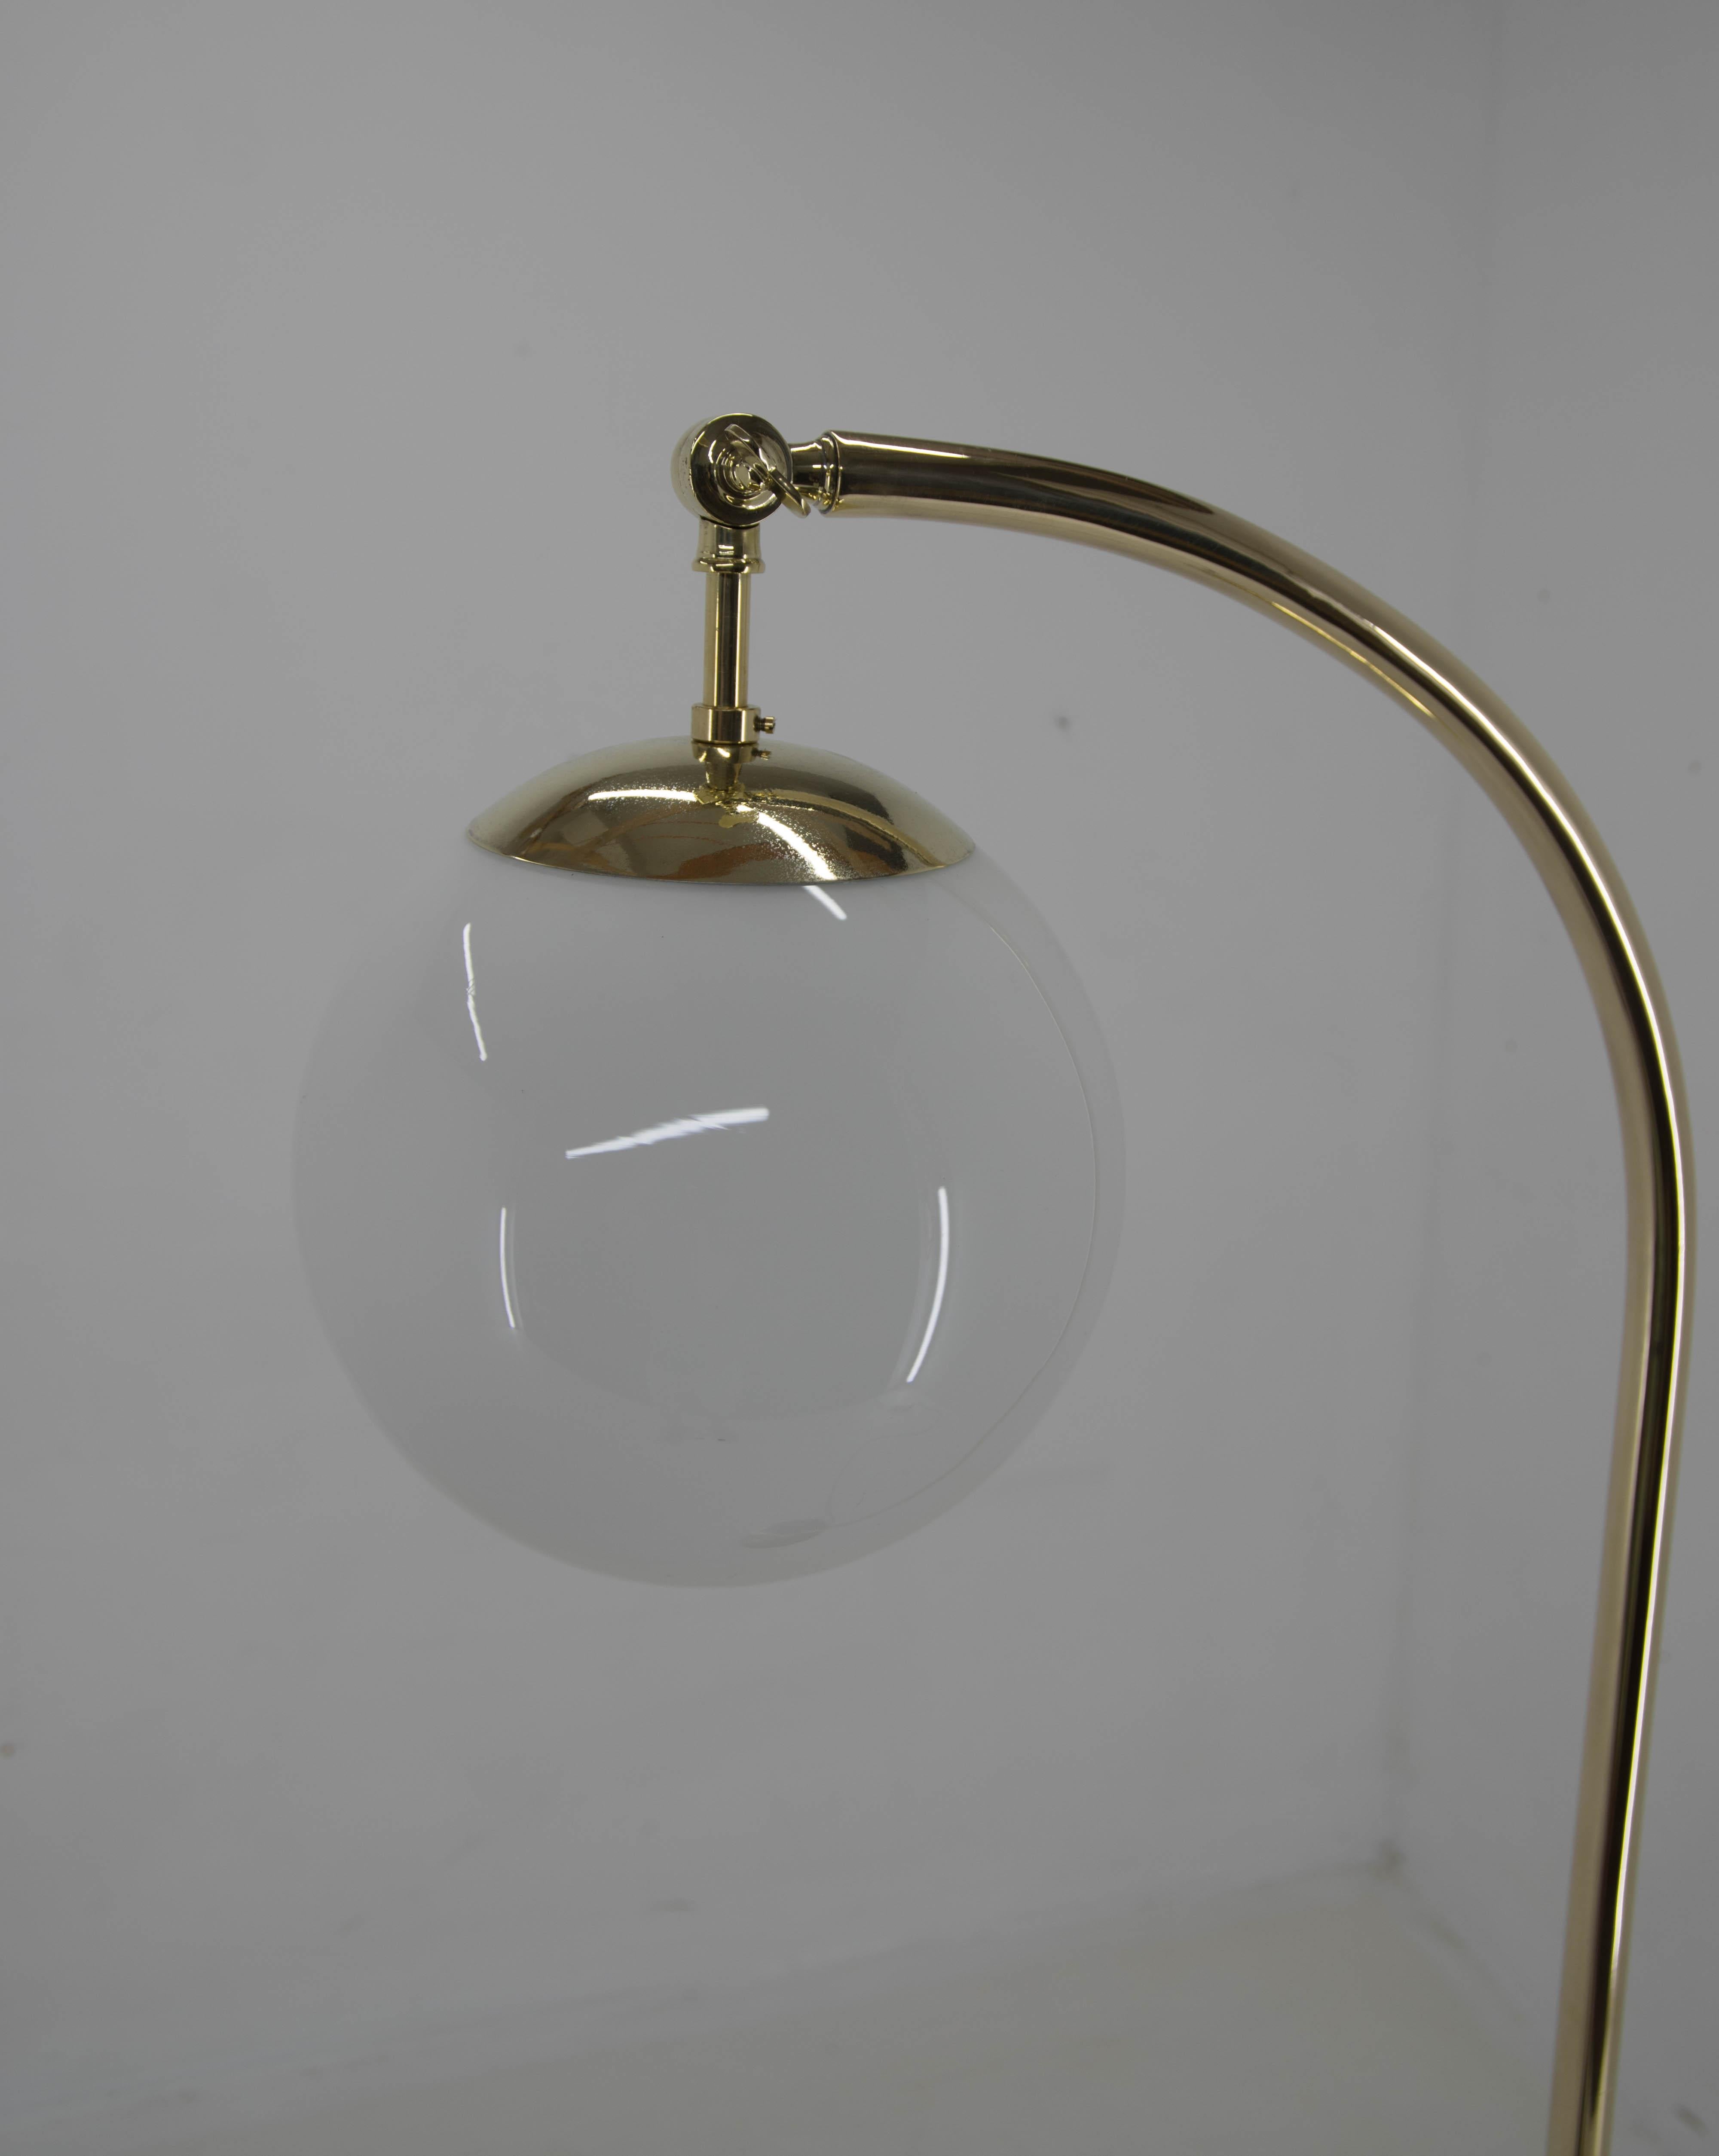 Rare brass functionalist floor lamp with adjustable shade.
Made in Czechoslovakia in 1930s.
Restored: brass polished, rewired.
1x100W, E25-E27 bulb
US plug adapter included
Shipping quote on request.